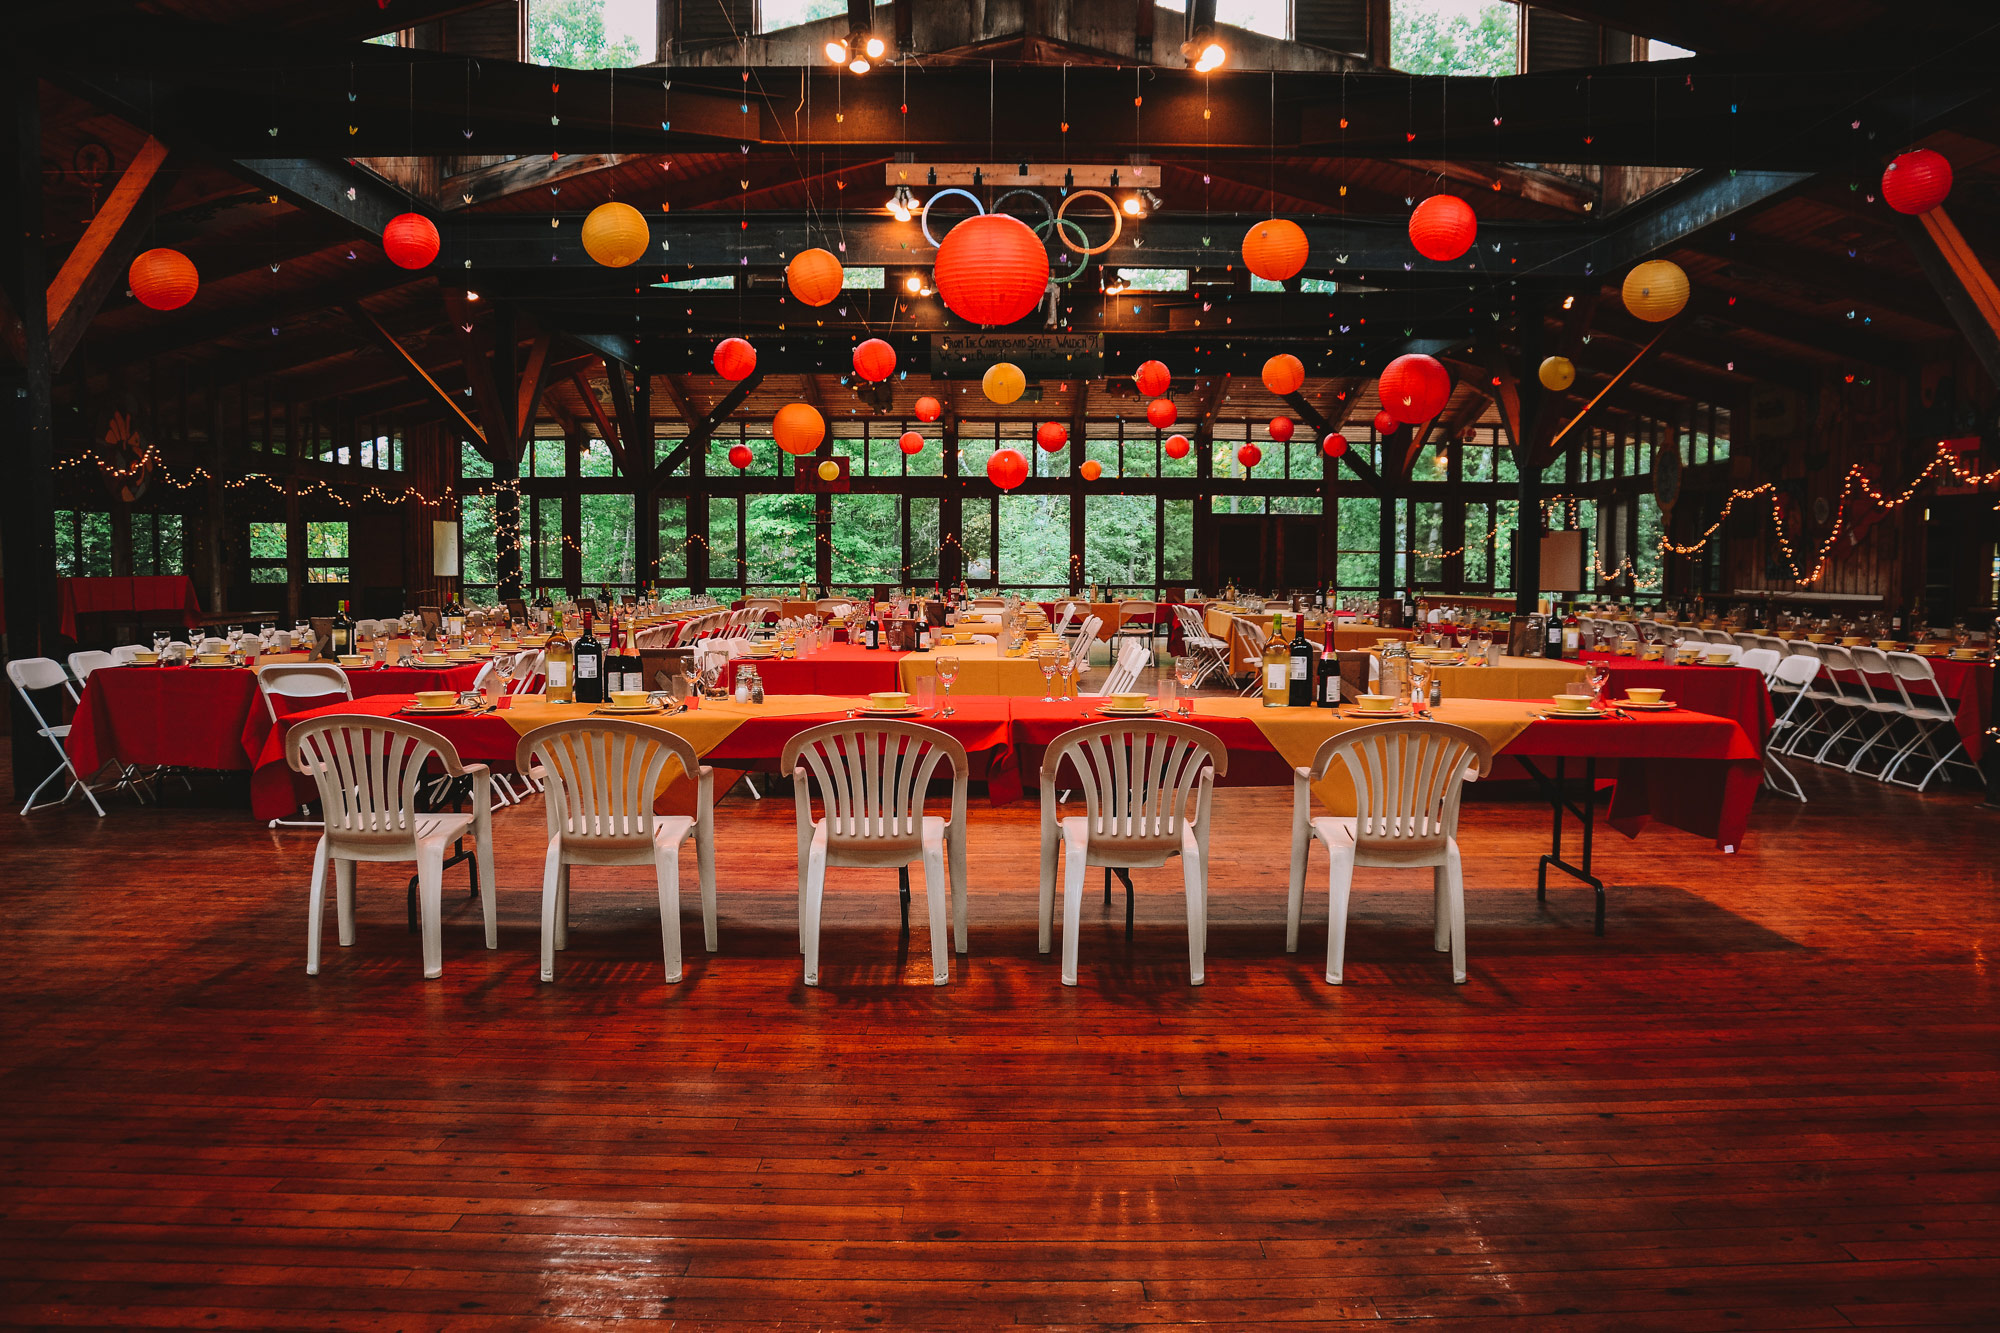 Dining Hall transformed into a magical wedding reception